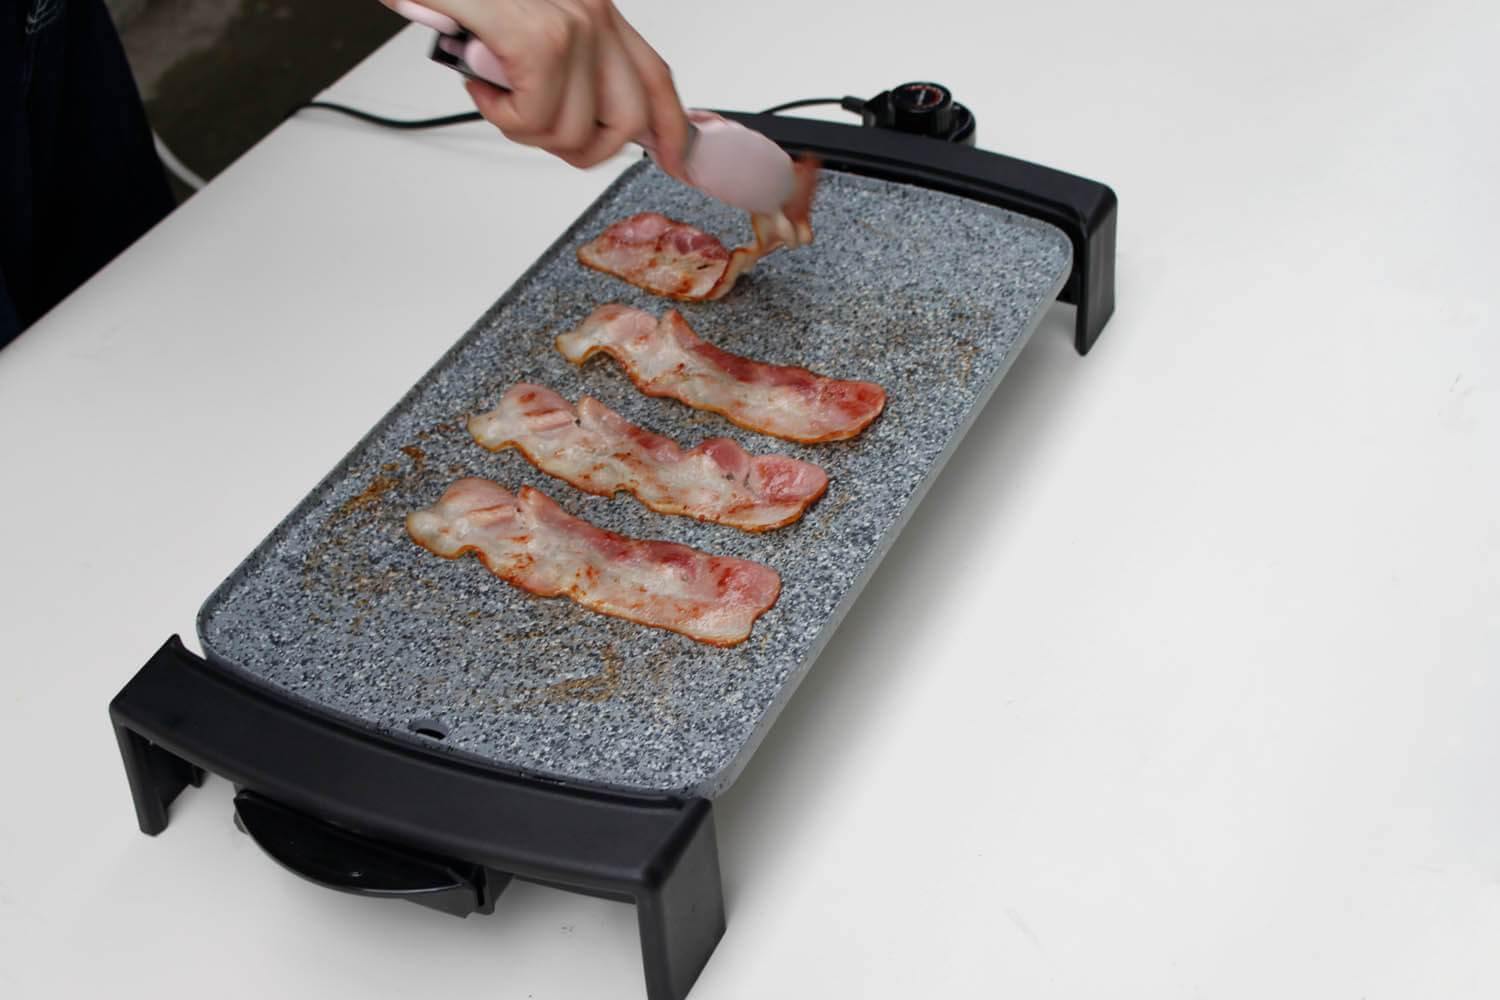 Bacons on Atgrills electric griddle